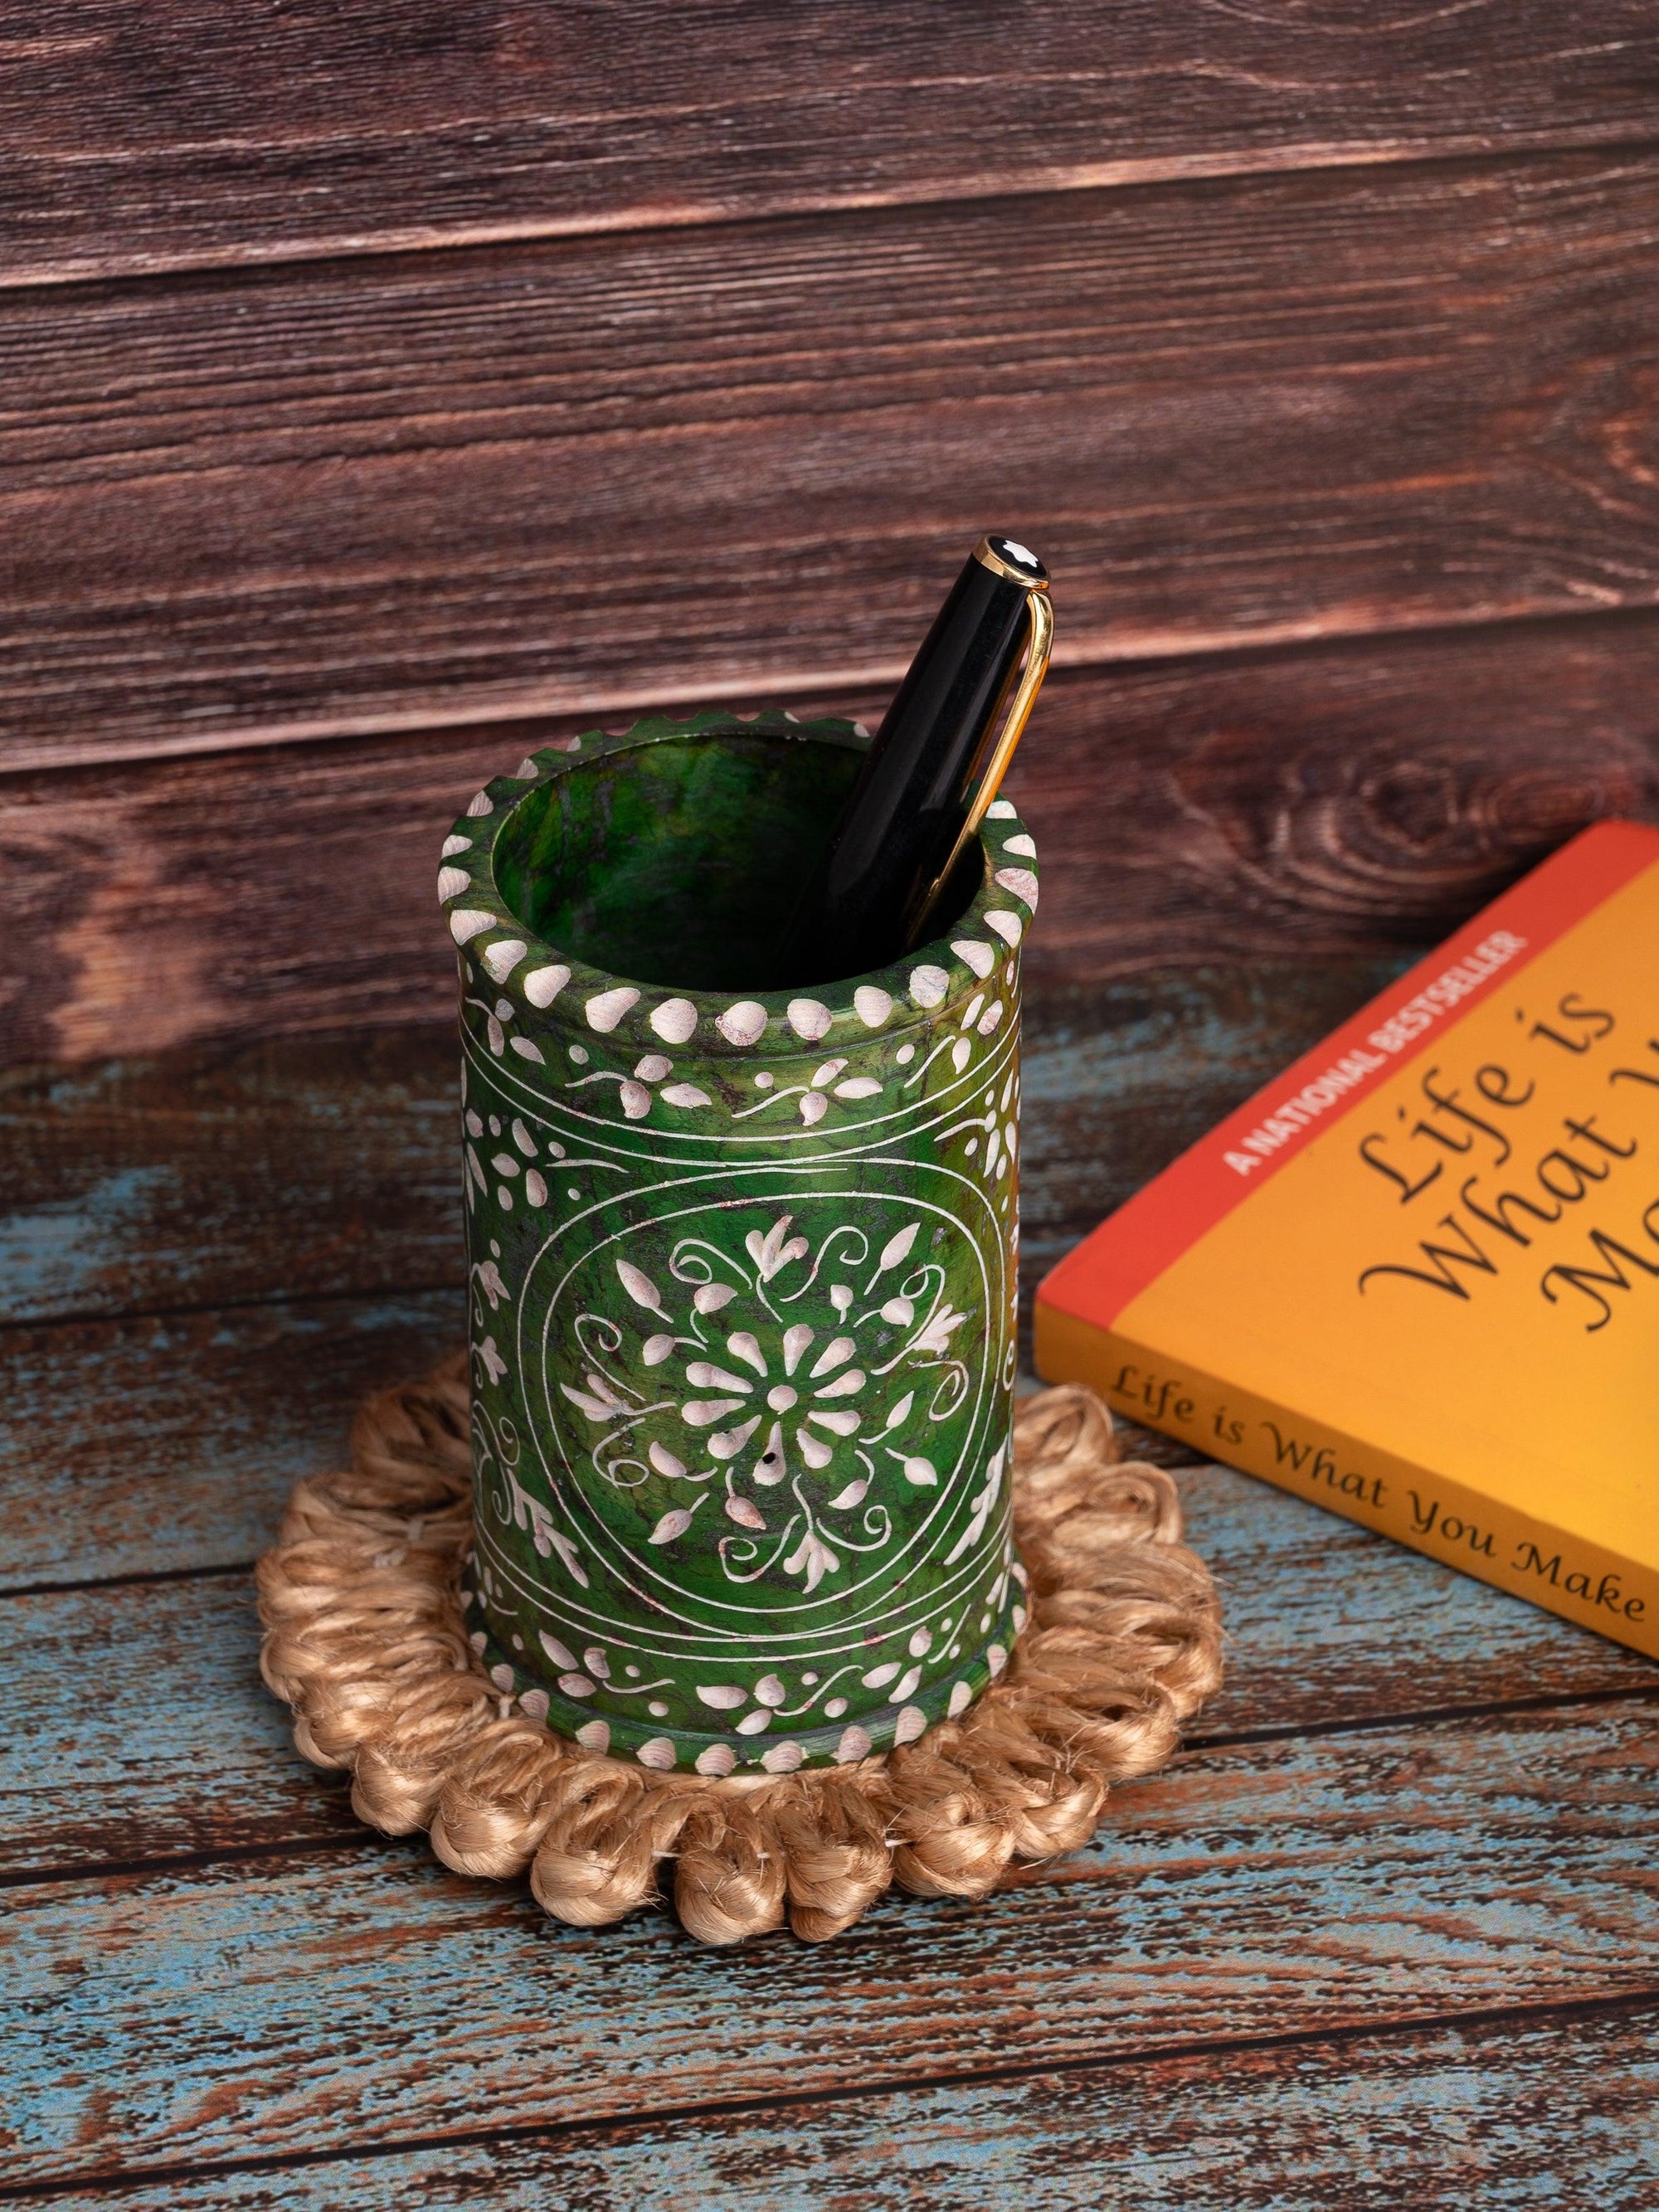 Hand crafted soap stone pen holder in green color - The Heritage Artifacts